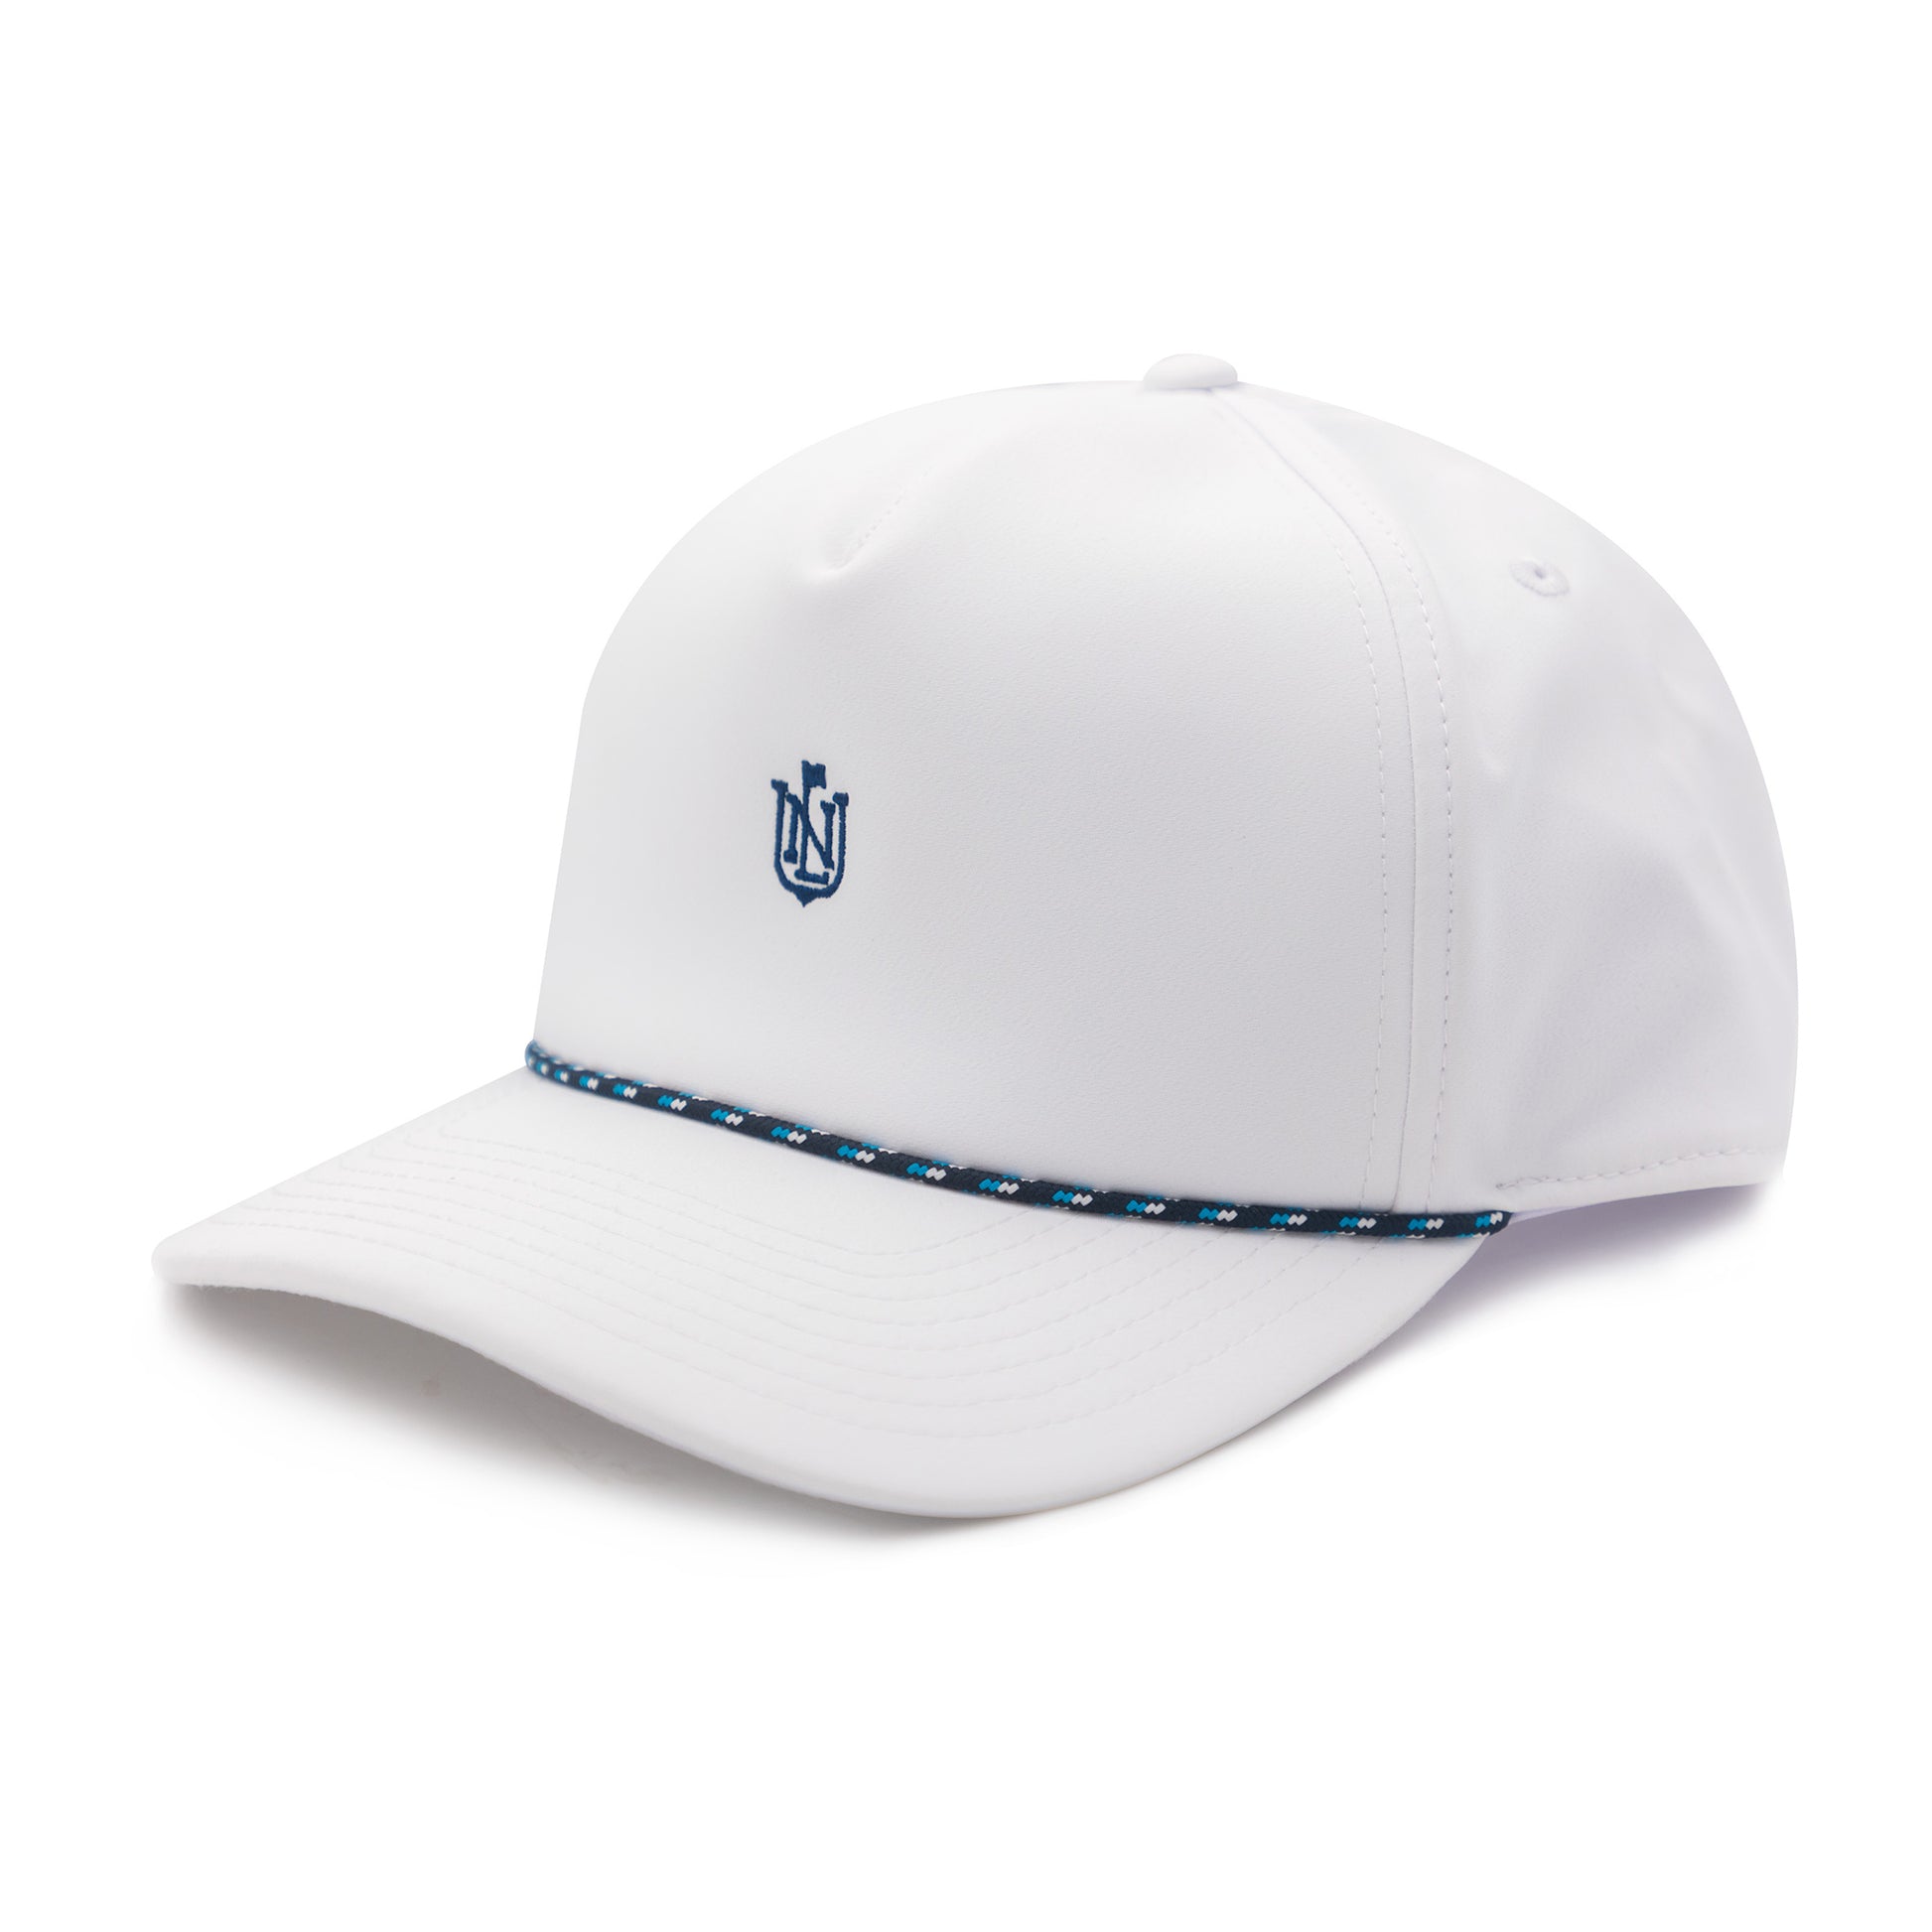 The NLU Crest Performance Rope Hat